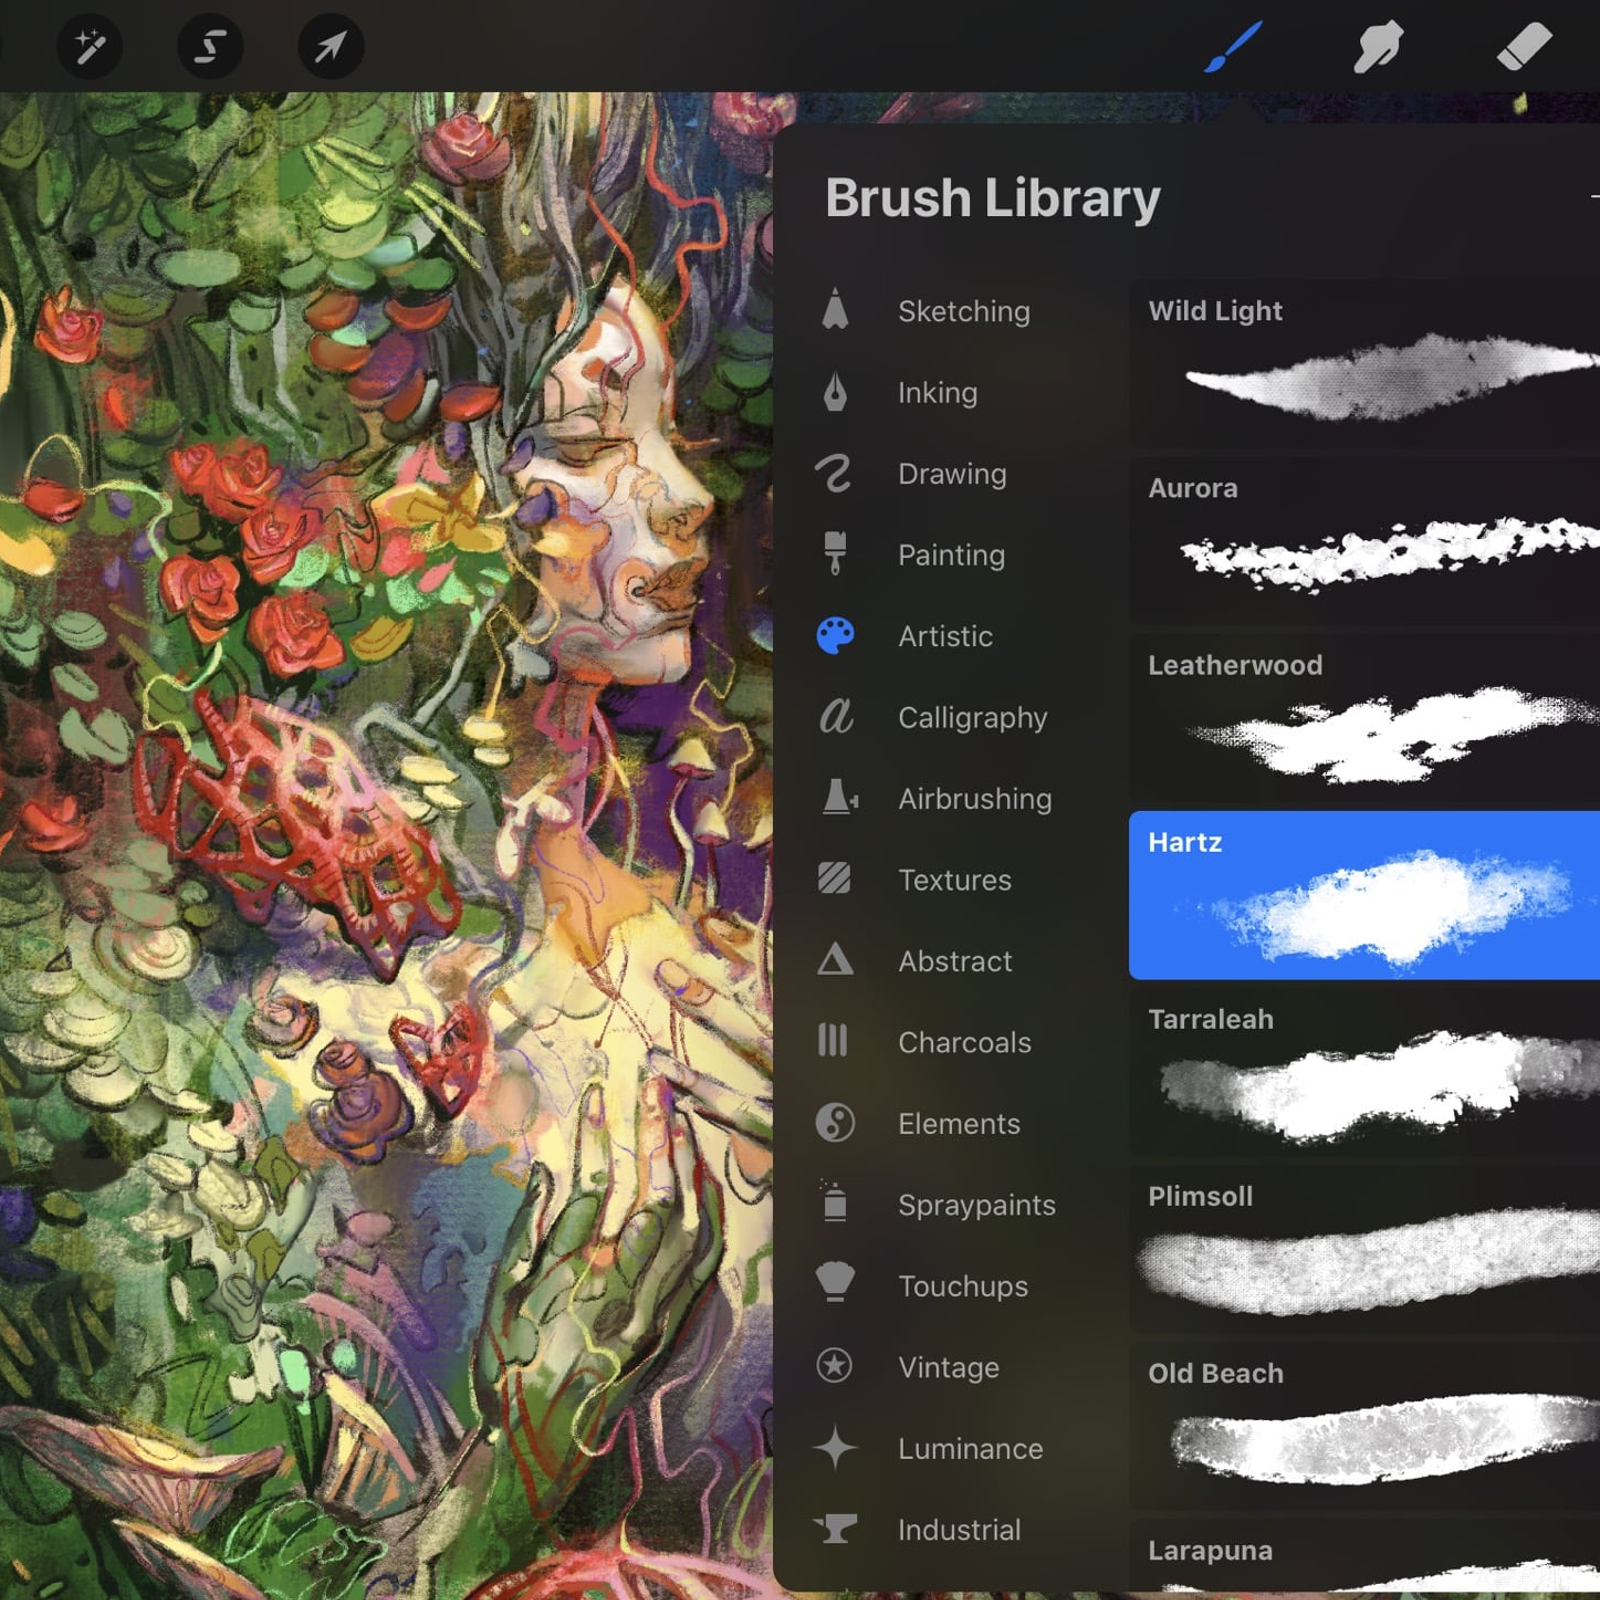 apps similar to procreate but free